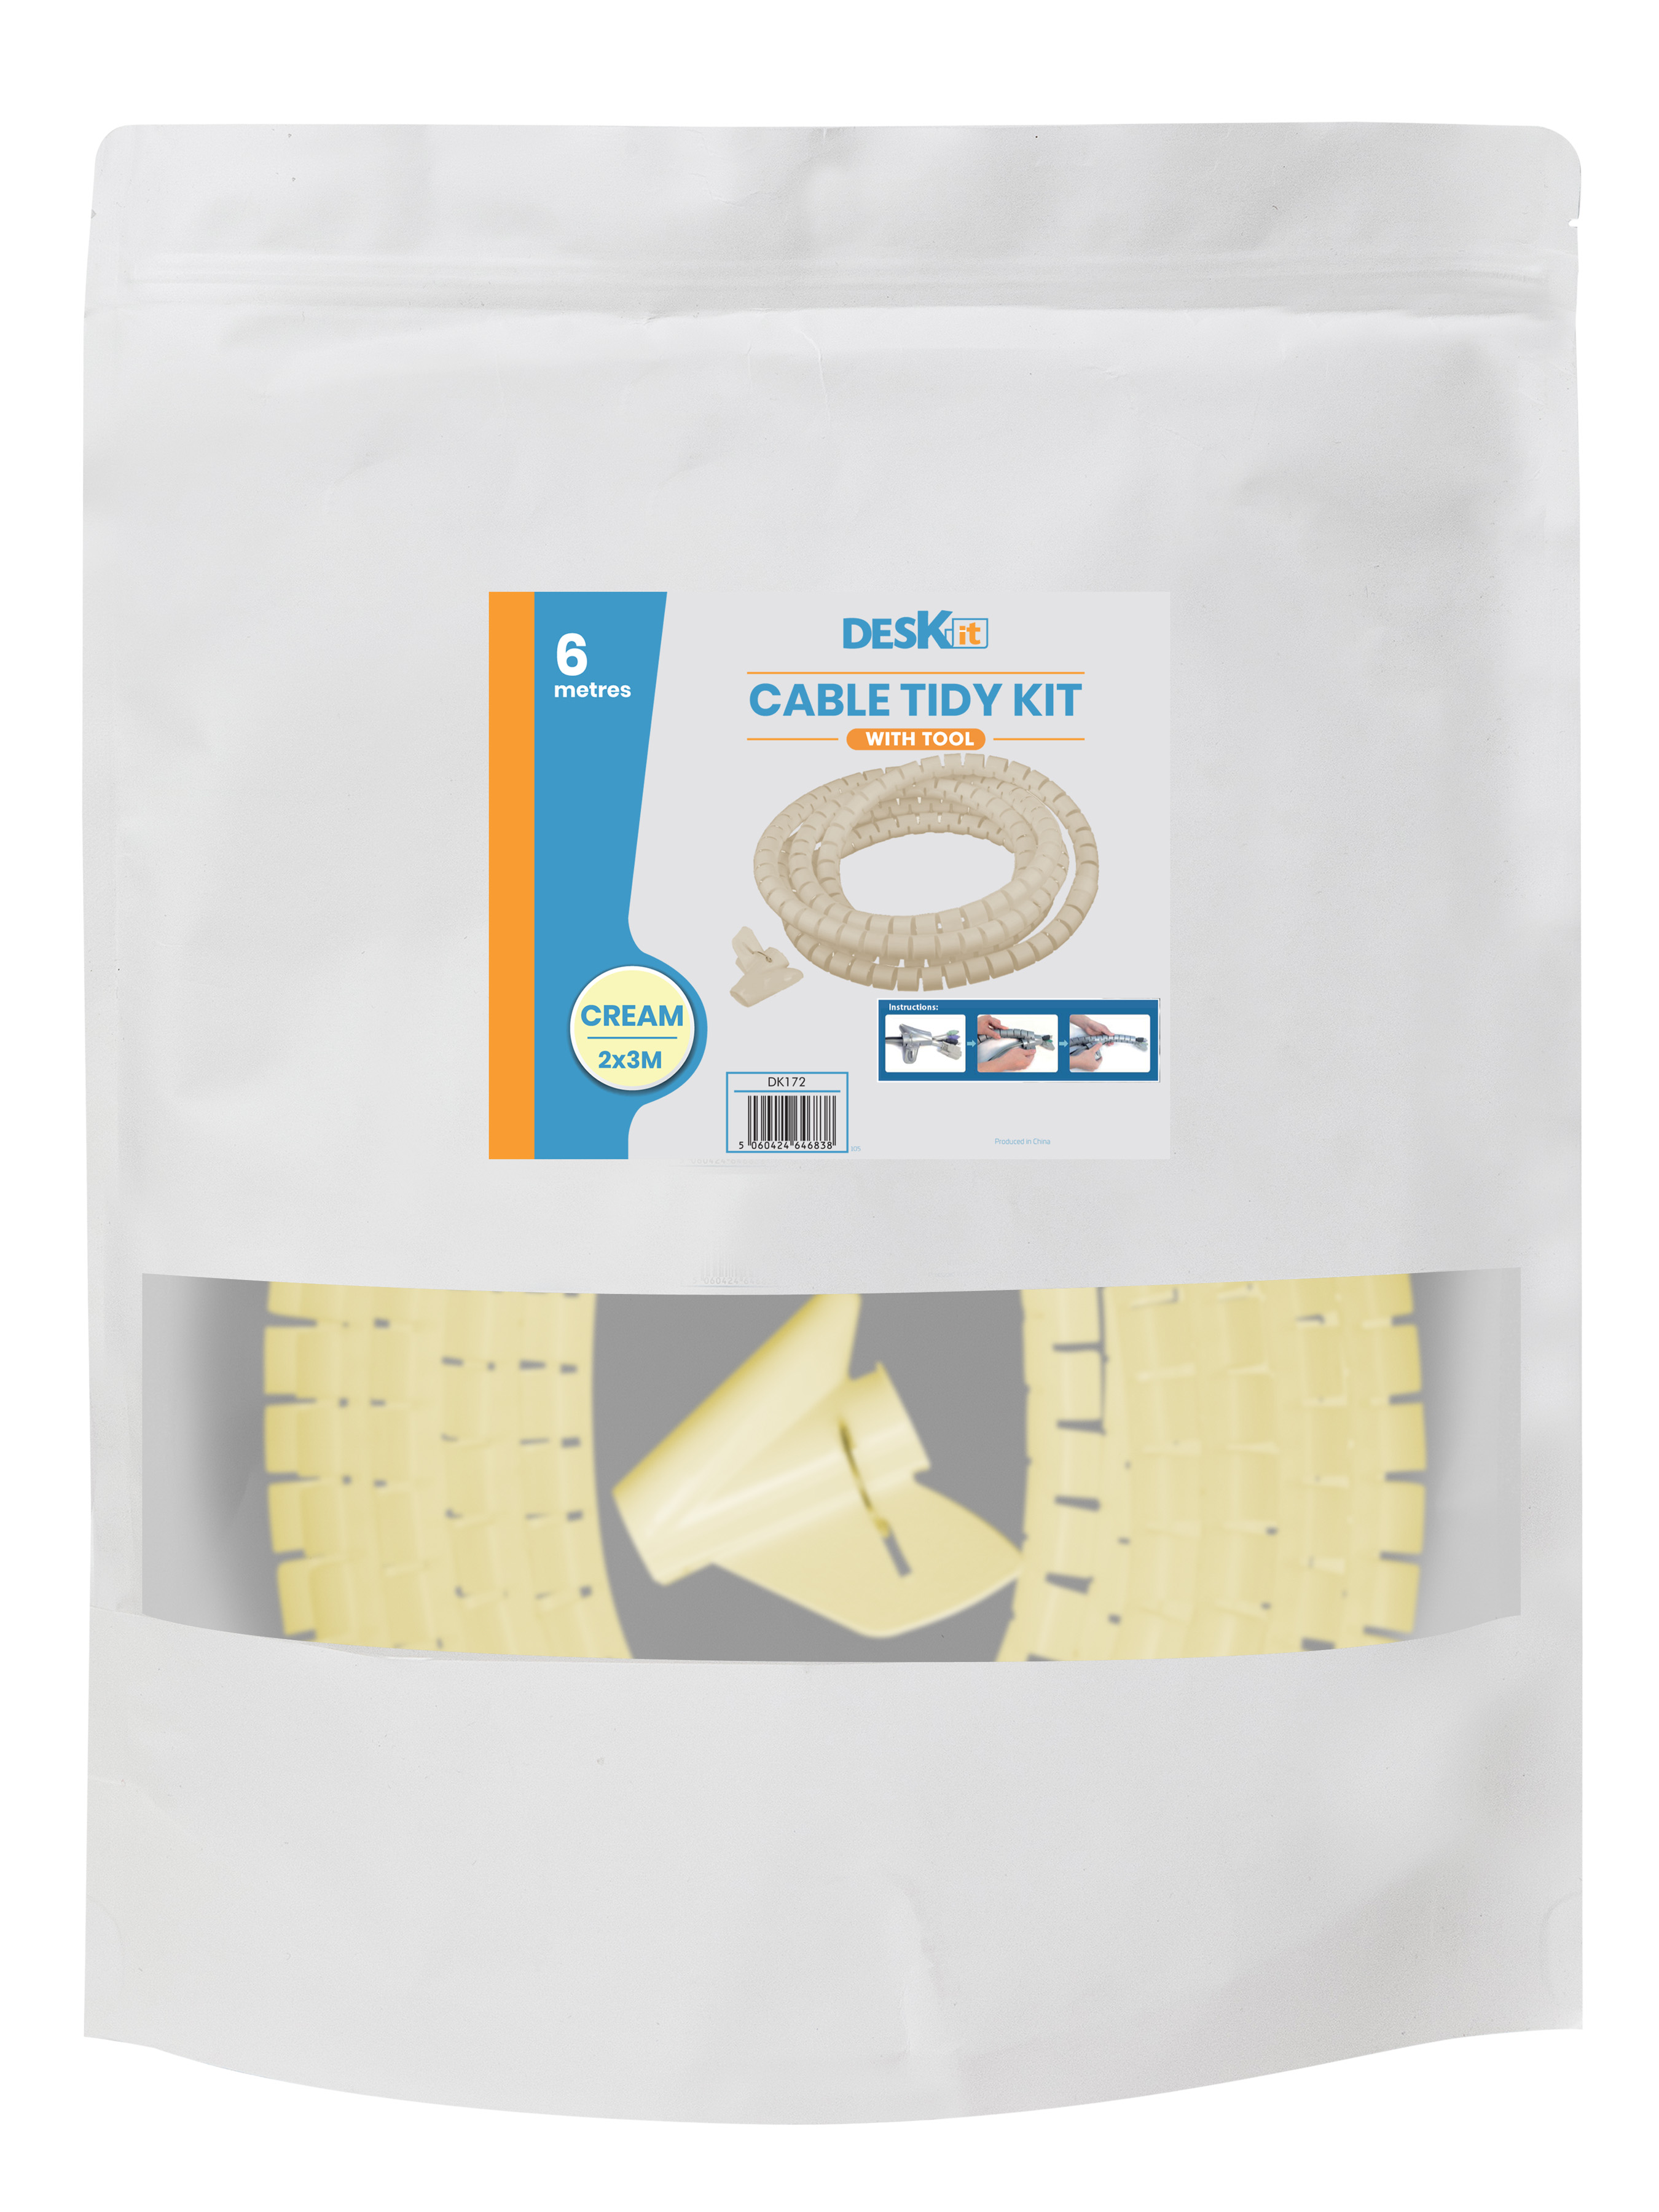 30 x Cream - 6m - Cable Tidy - Spiral Cable Wrap - Pack of 2 x 3m + Fitting Tool - Larger Capacity 20mm Diameter - Cable Management for PC, TV Wires a